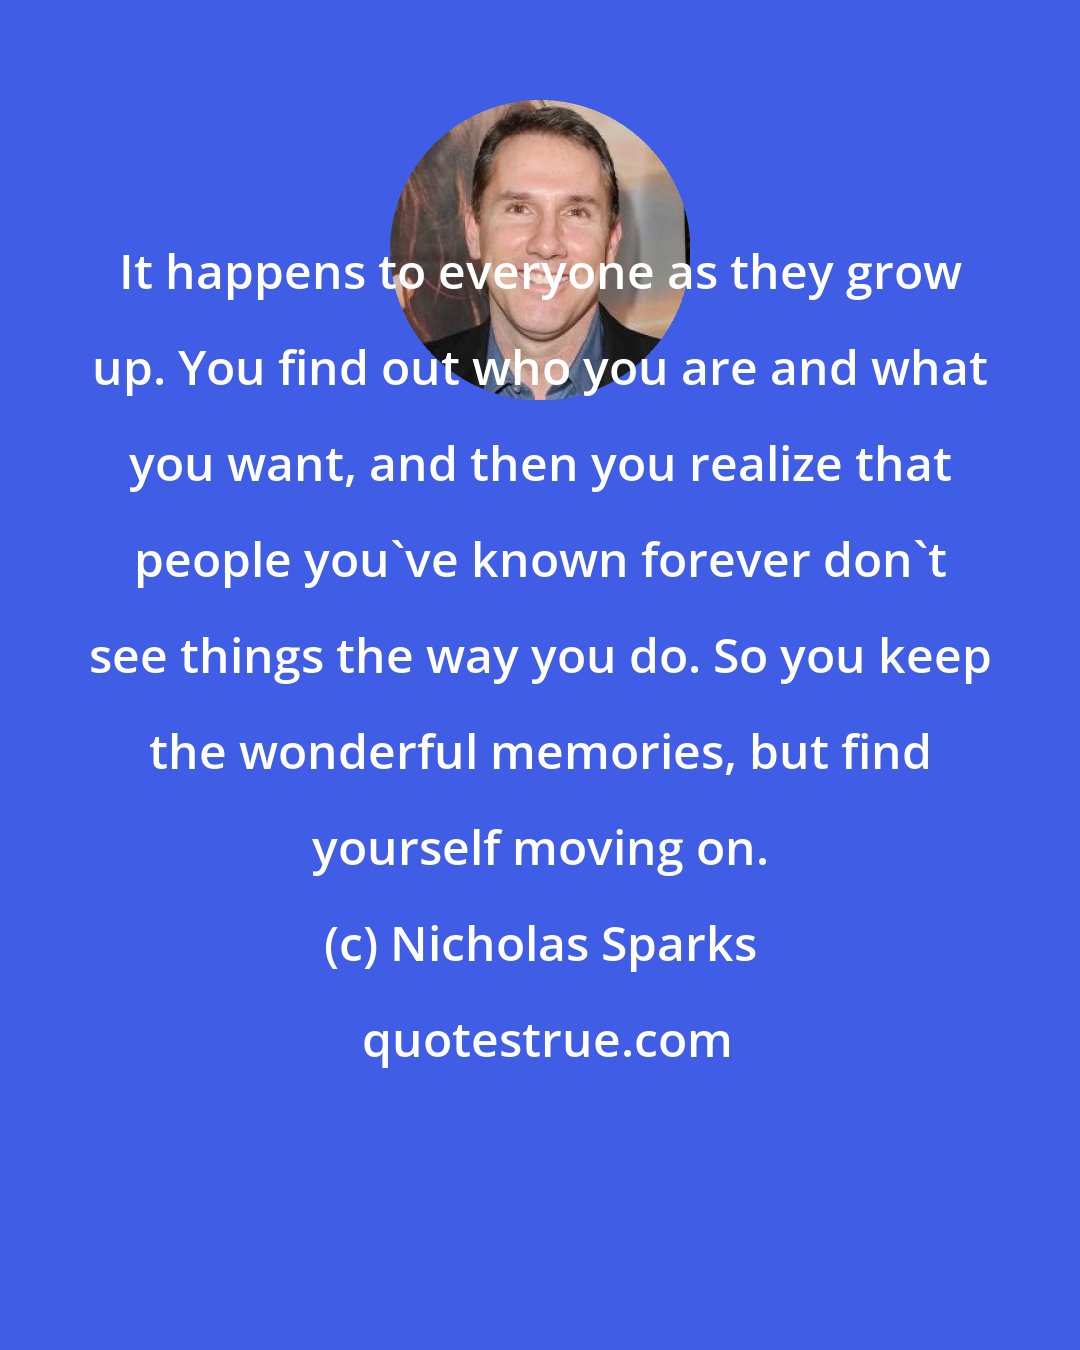 Nicholas Sparks: It happens to everyone as they grow up. You find out who you are and what you want, and then you realize that people you've known forever don't see things the way you do. So you keep the wonderful memories, but find yourself moving on.